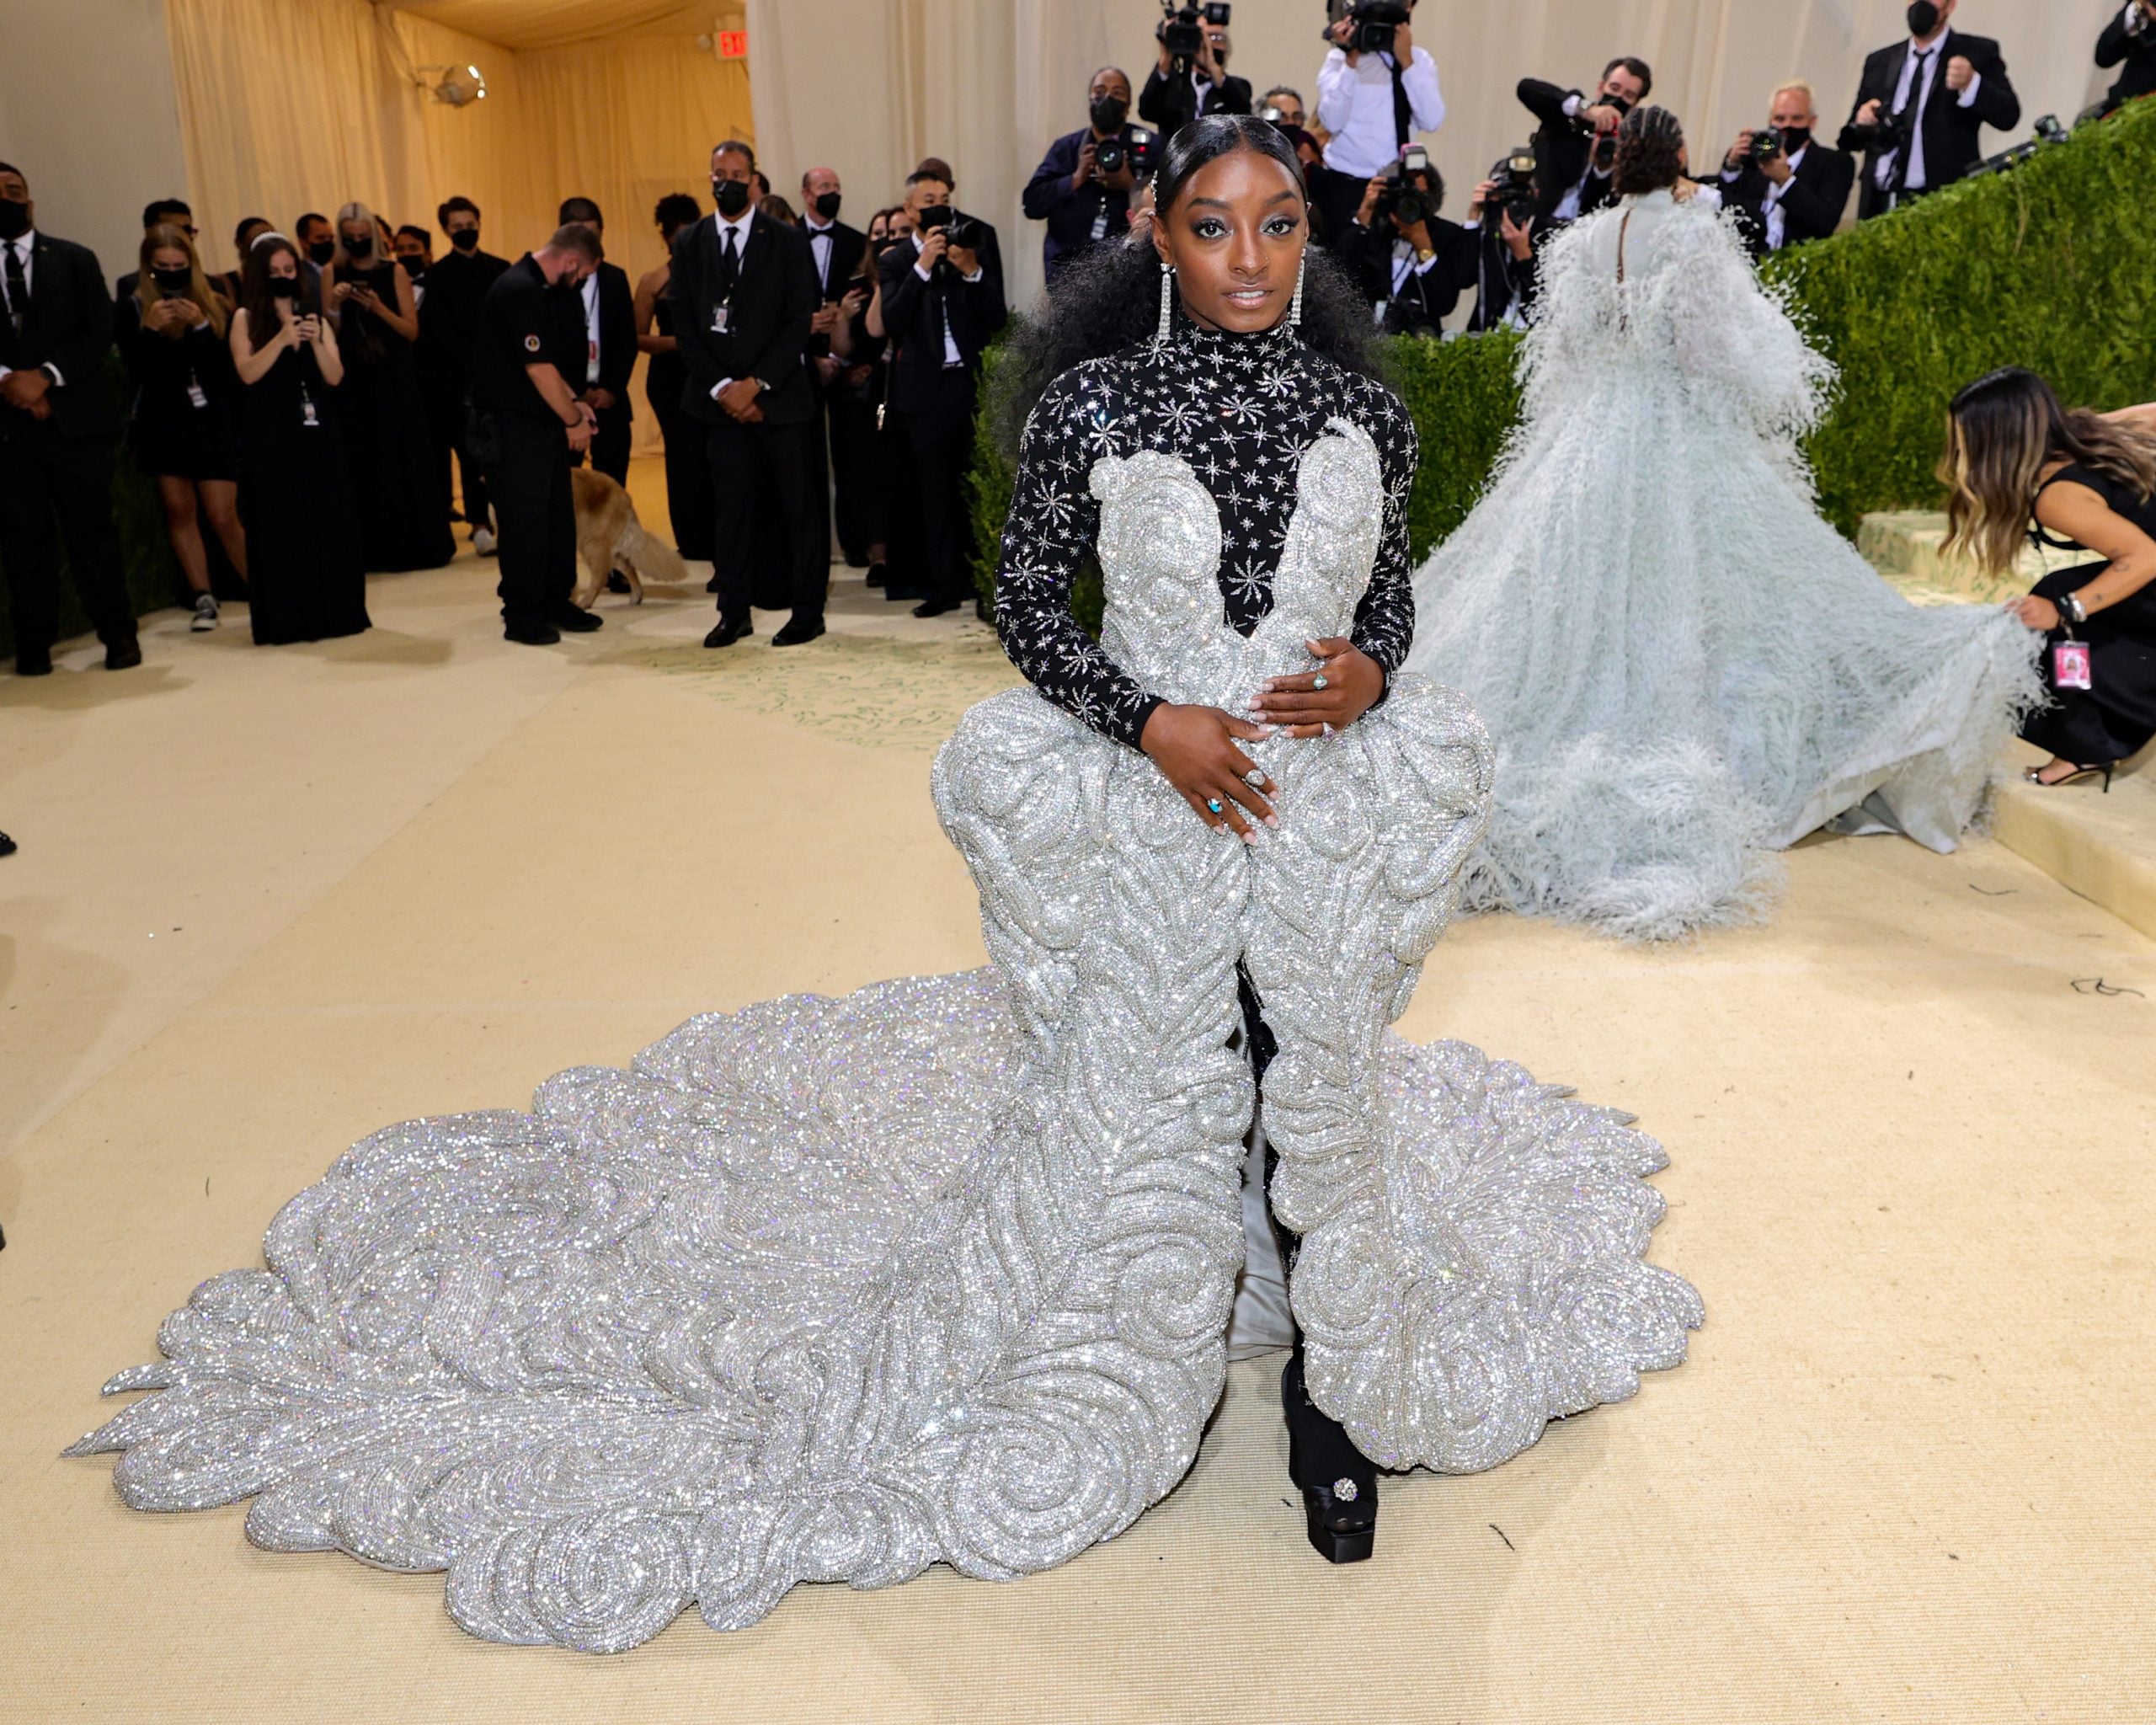 Met Gala 2022: Everything You Need To Know For The Most Exclusive Fashion Event Of The Year